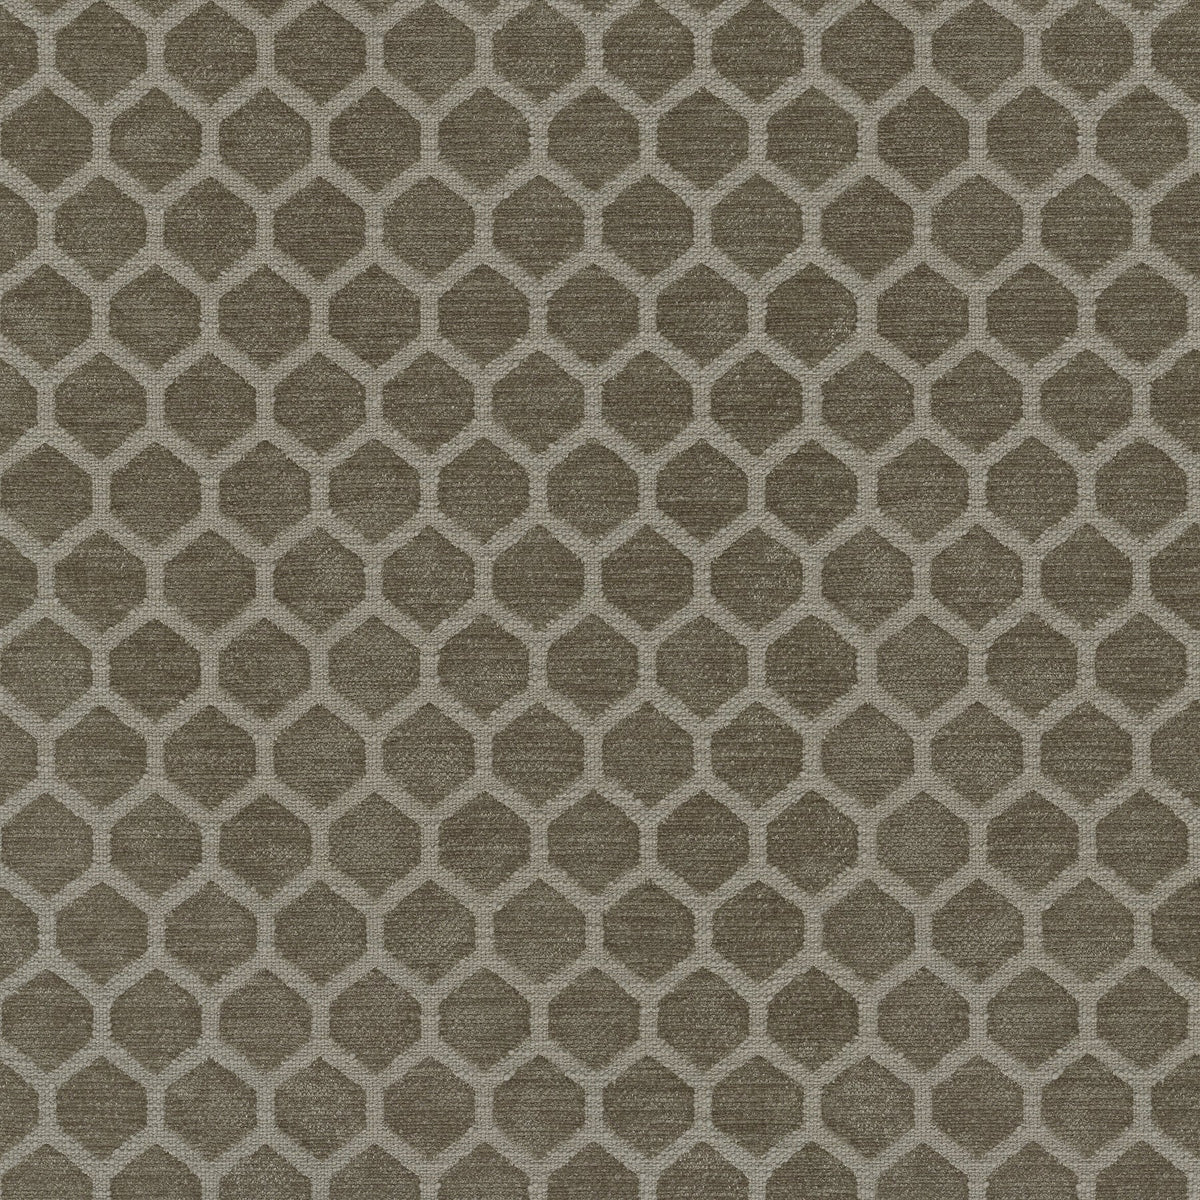 P/K Lifestyles Performance Honeycomb - Fossil 411375 Upholstery Fabric